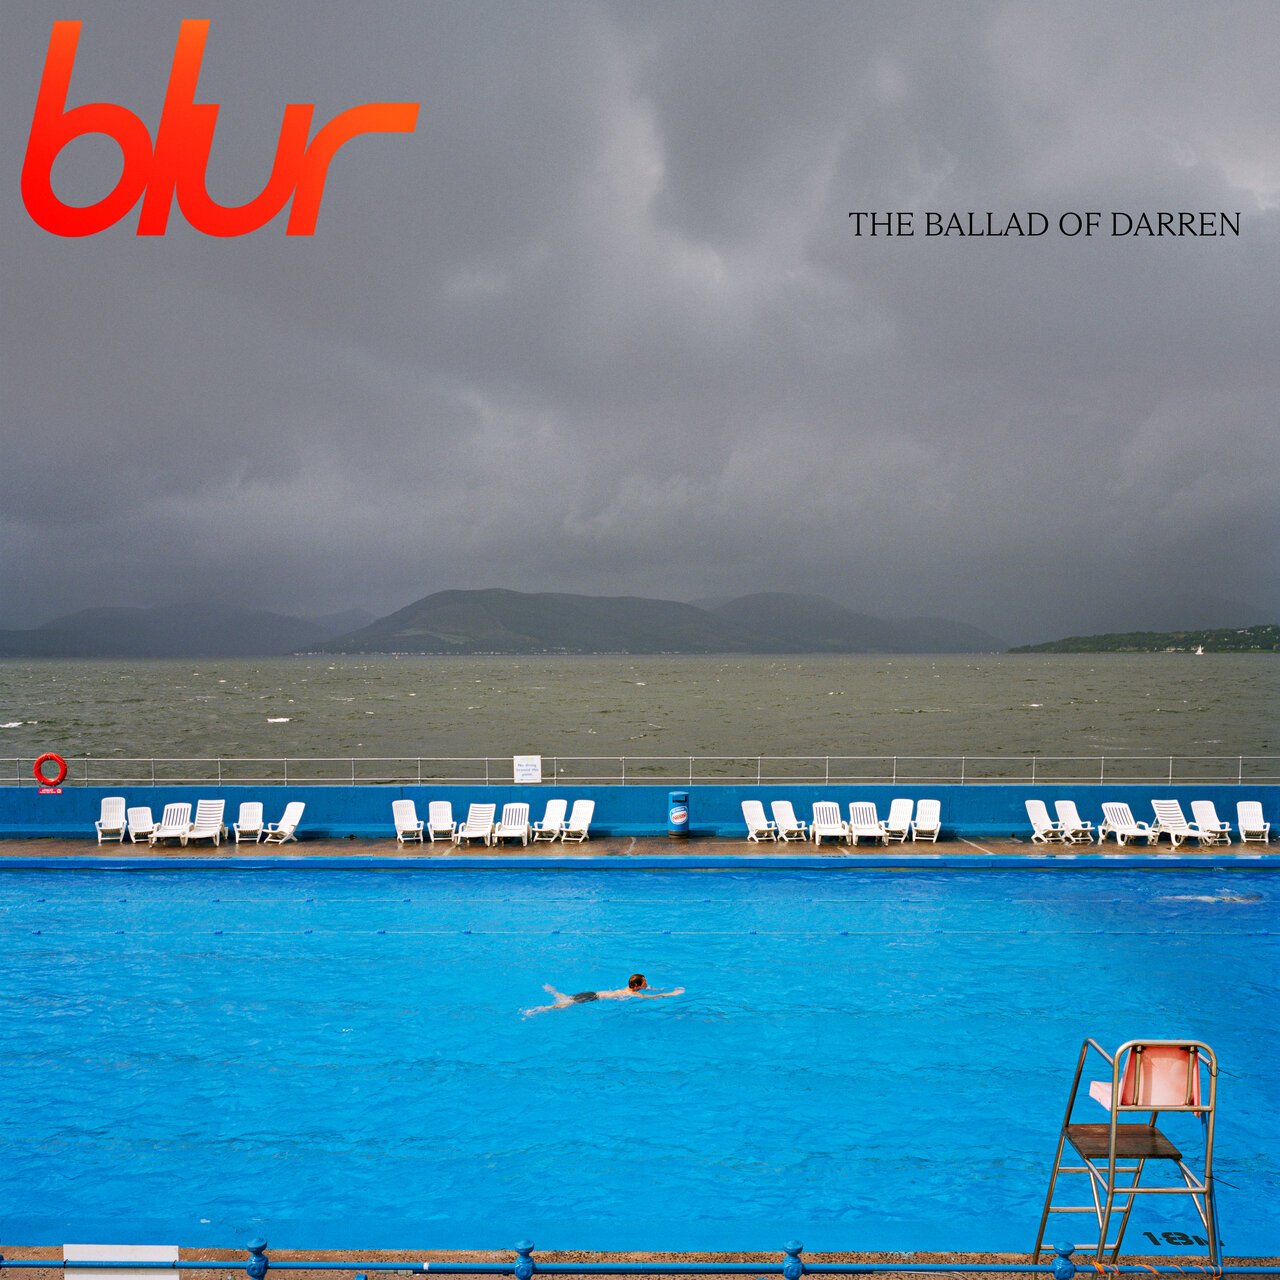 Art for The Ballad by Blur